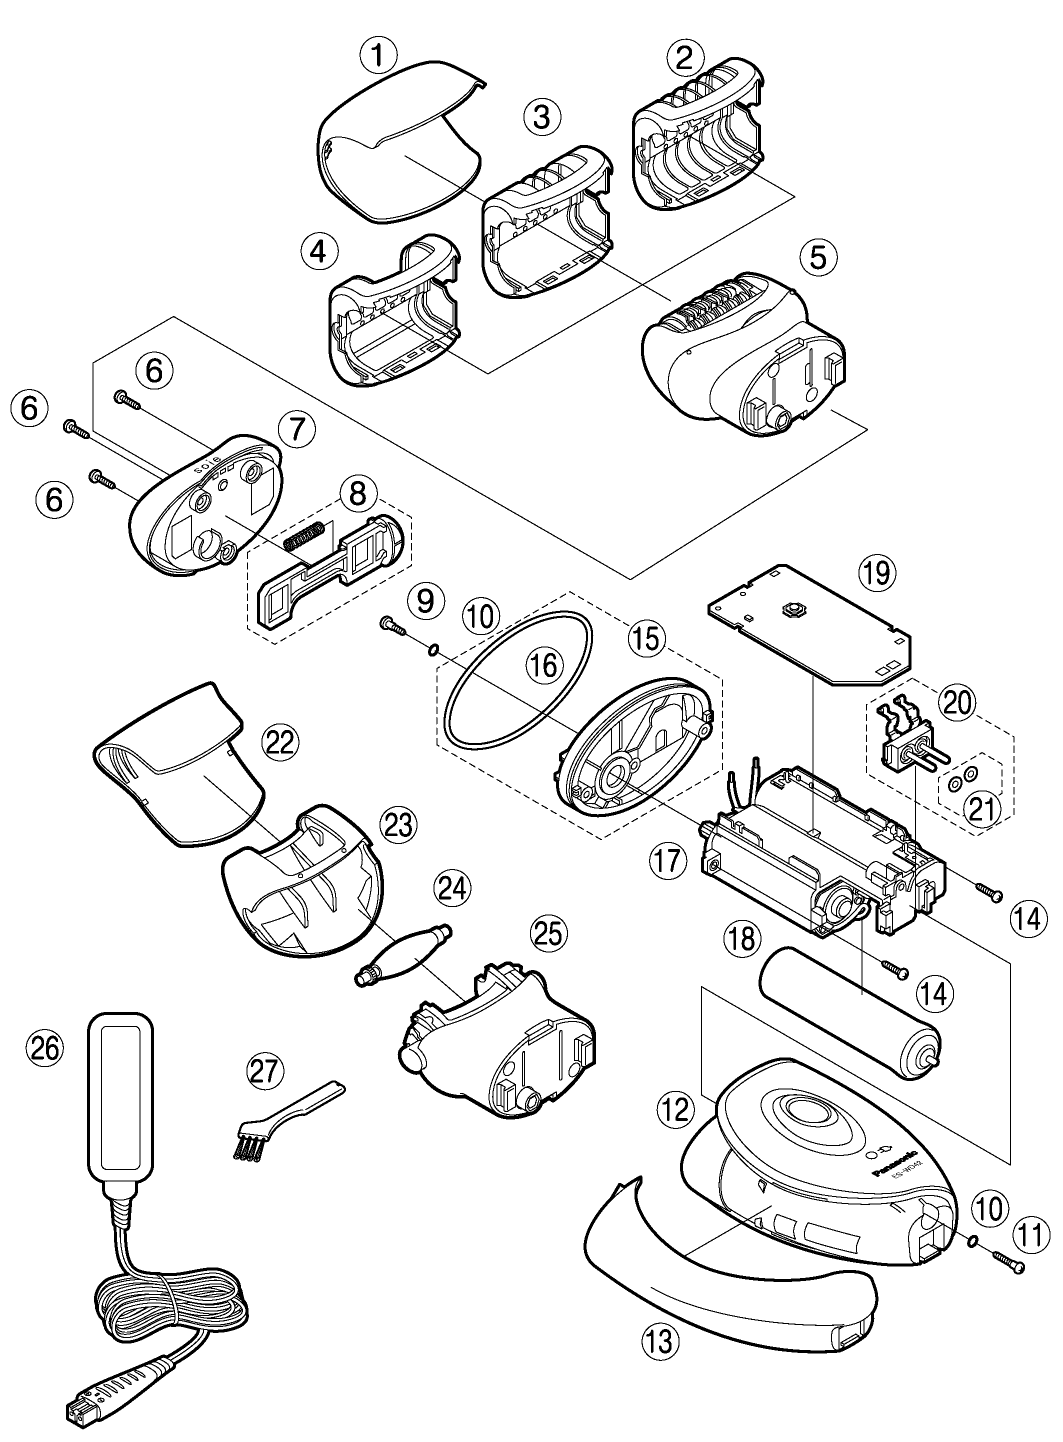 ES-WD42: Exploded View